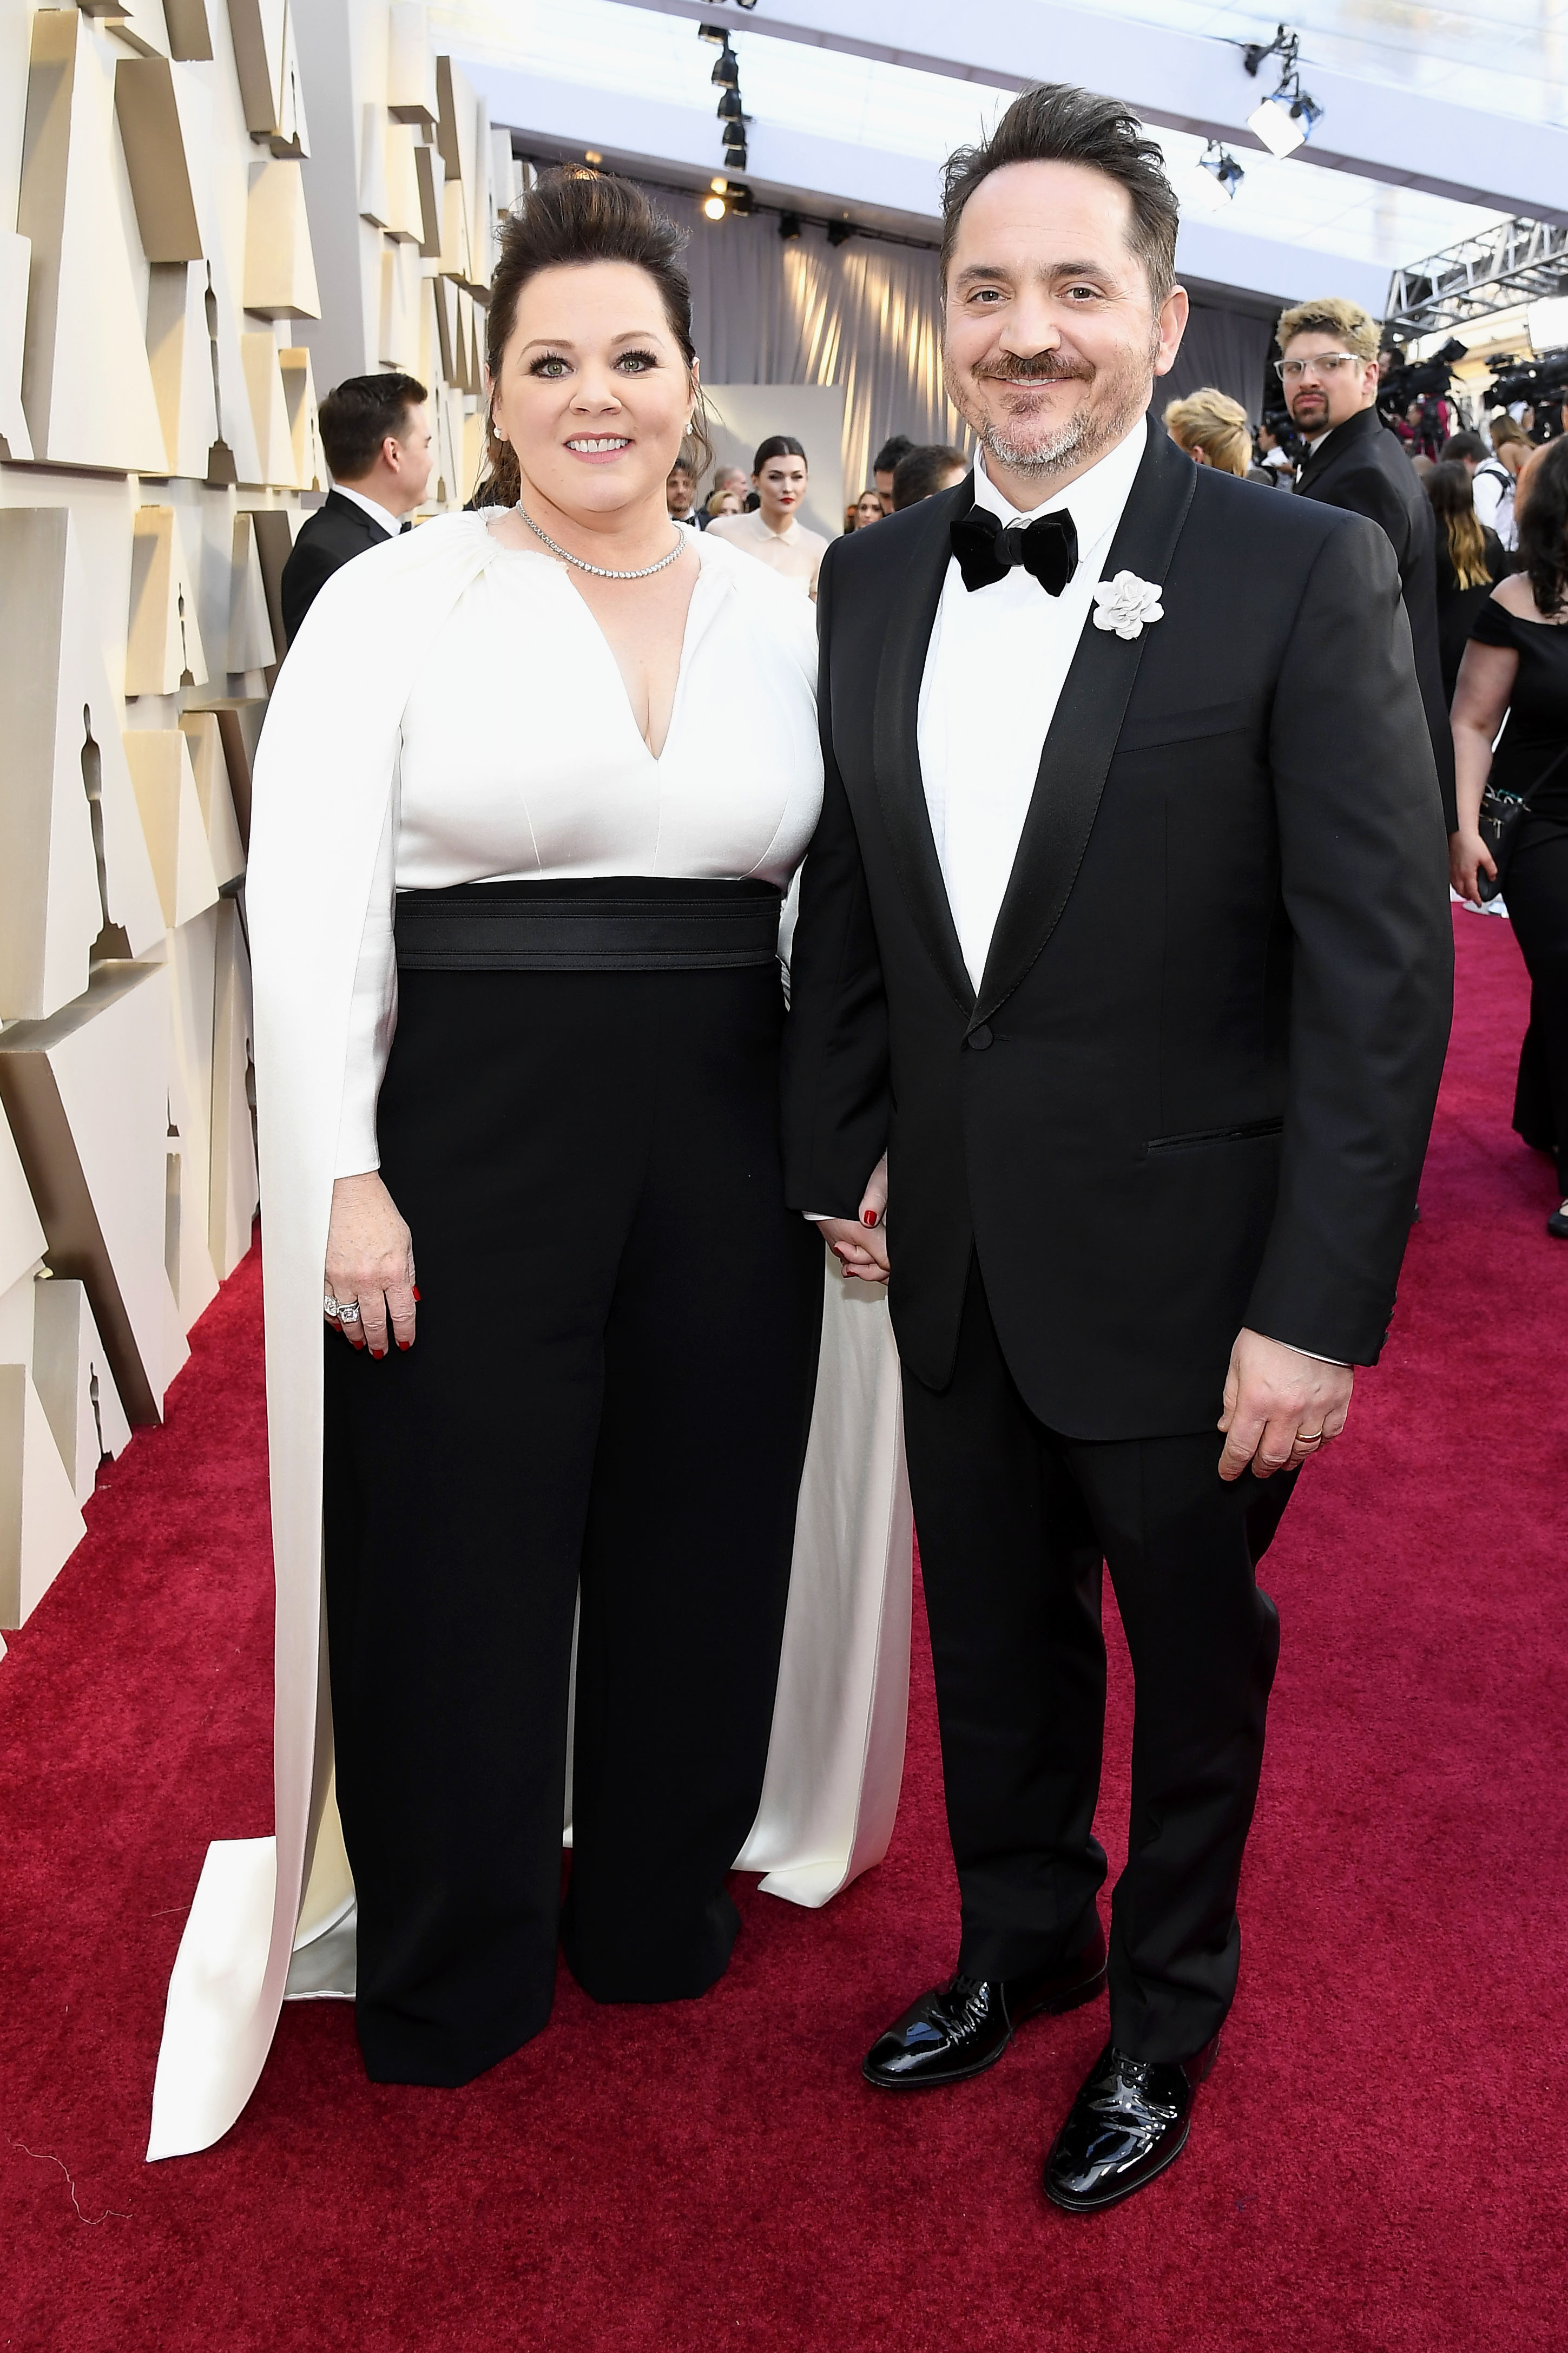 Melissa McCarthy and Ben Falcone attend the 91st Annual Academy Awards at Hollywood and Highland on February 24, 2019 in Hollywood, California.